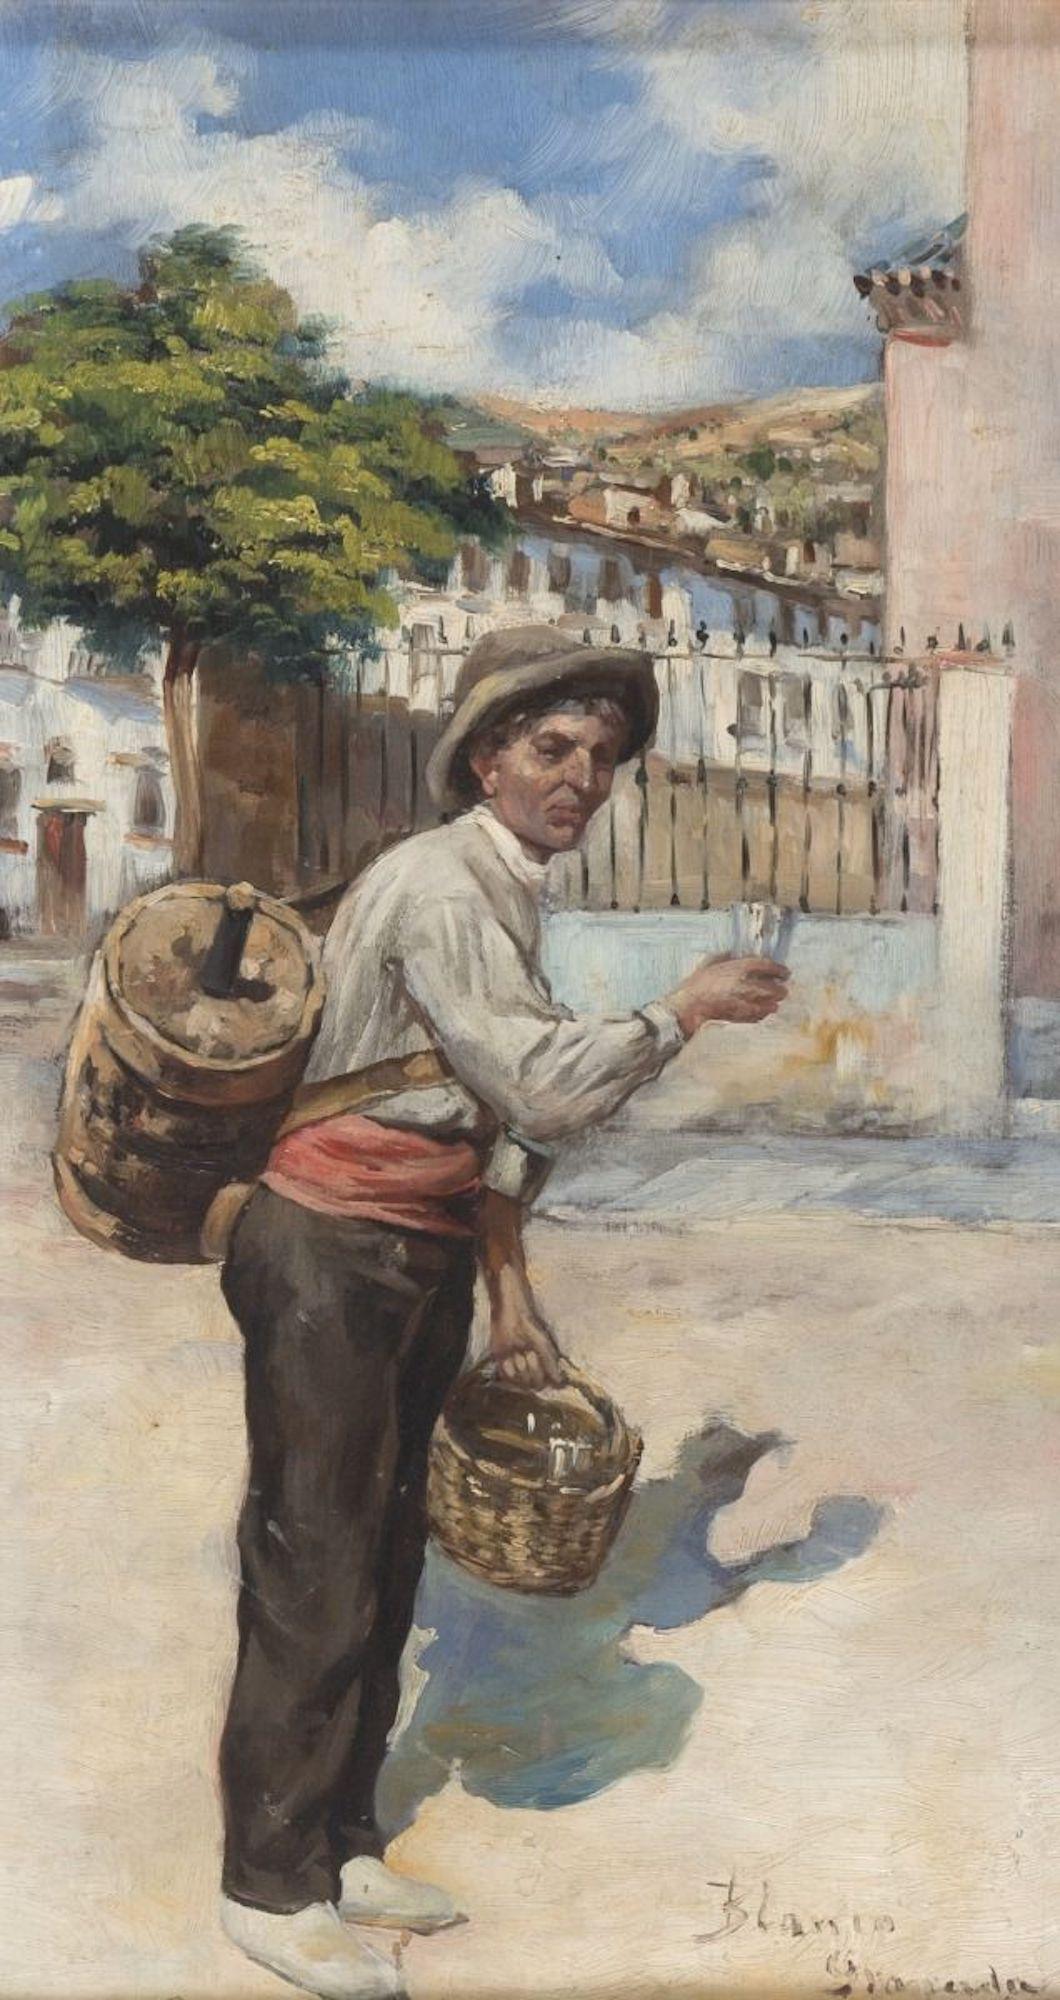 Unknown Figurative Painting - The Wine Seller - Oil on Wooden Panel signed "Blanco Granada" - 19th Century